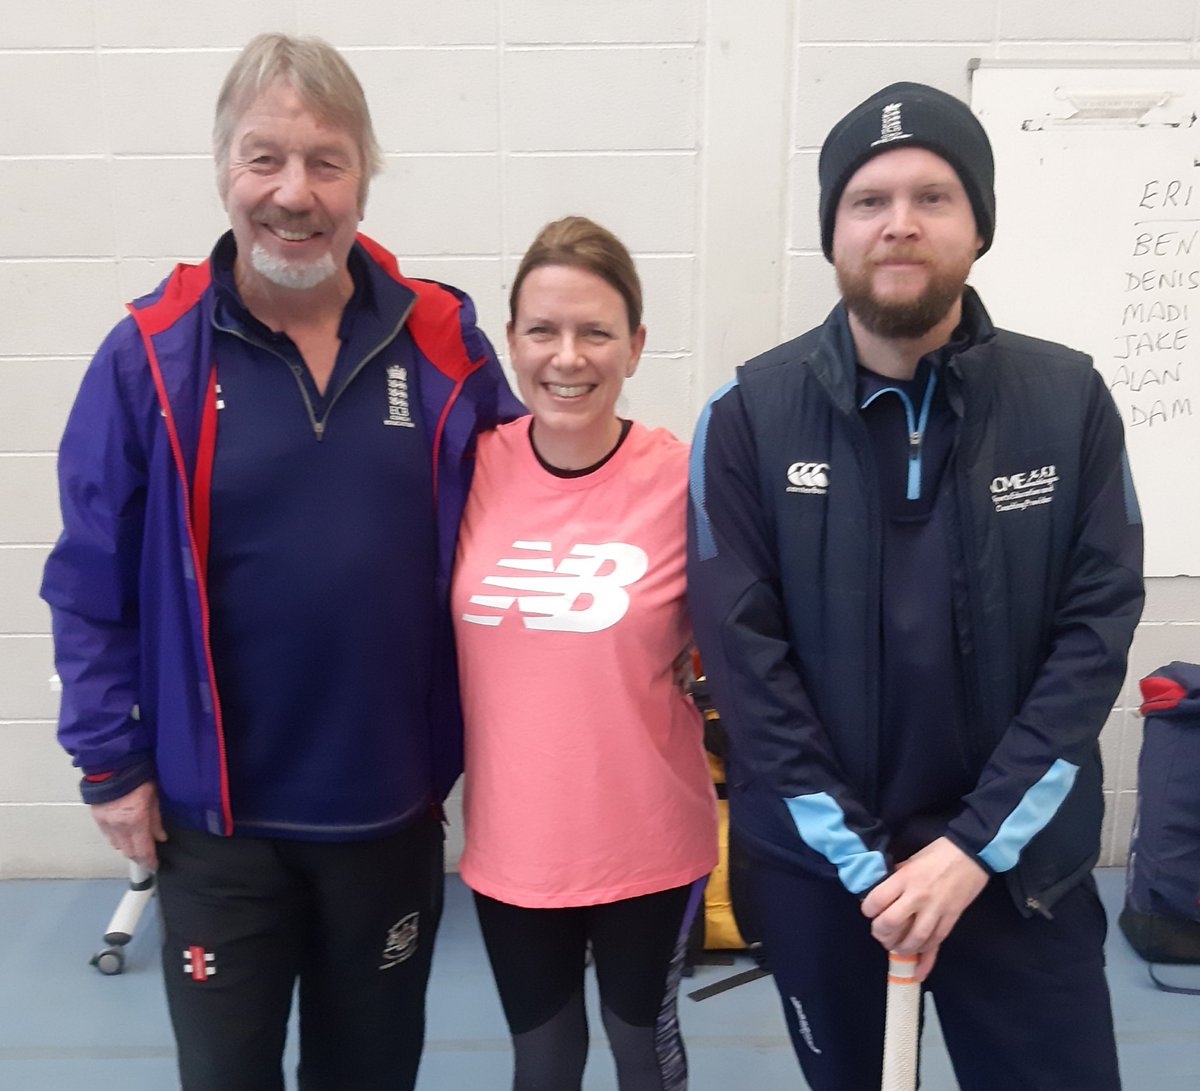 Thank you from Madi to Gloucs coaches Eric and Jonno for a fantastic ECB Level 2 Core Coach course. Superb support for achieving this qualification from all involved, including my son Luke Pavey-Edwards and the ever helpful Wade Rissdale.
#GlosCricketFdn
#CricketForAll